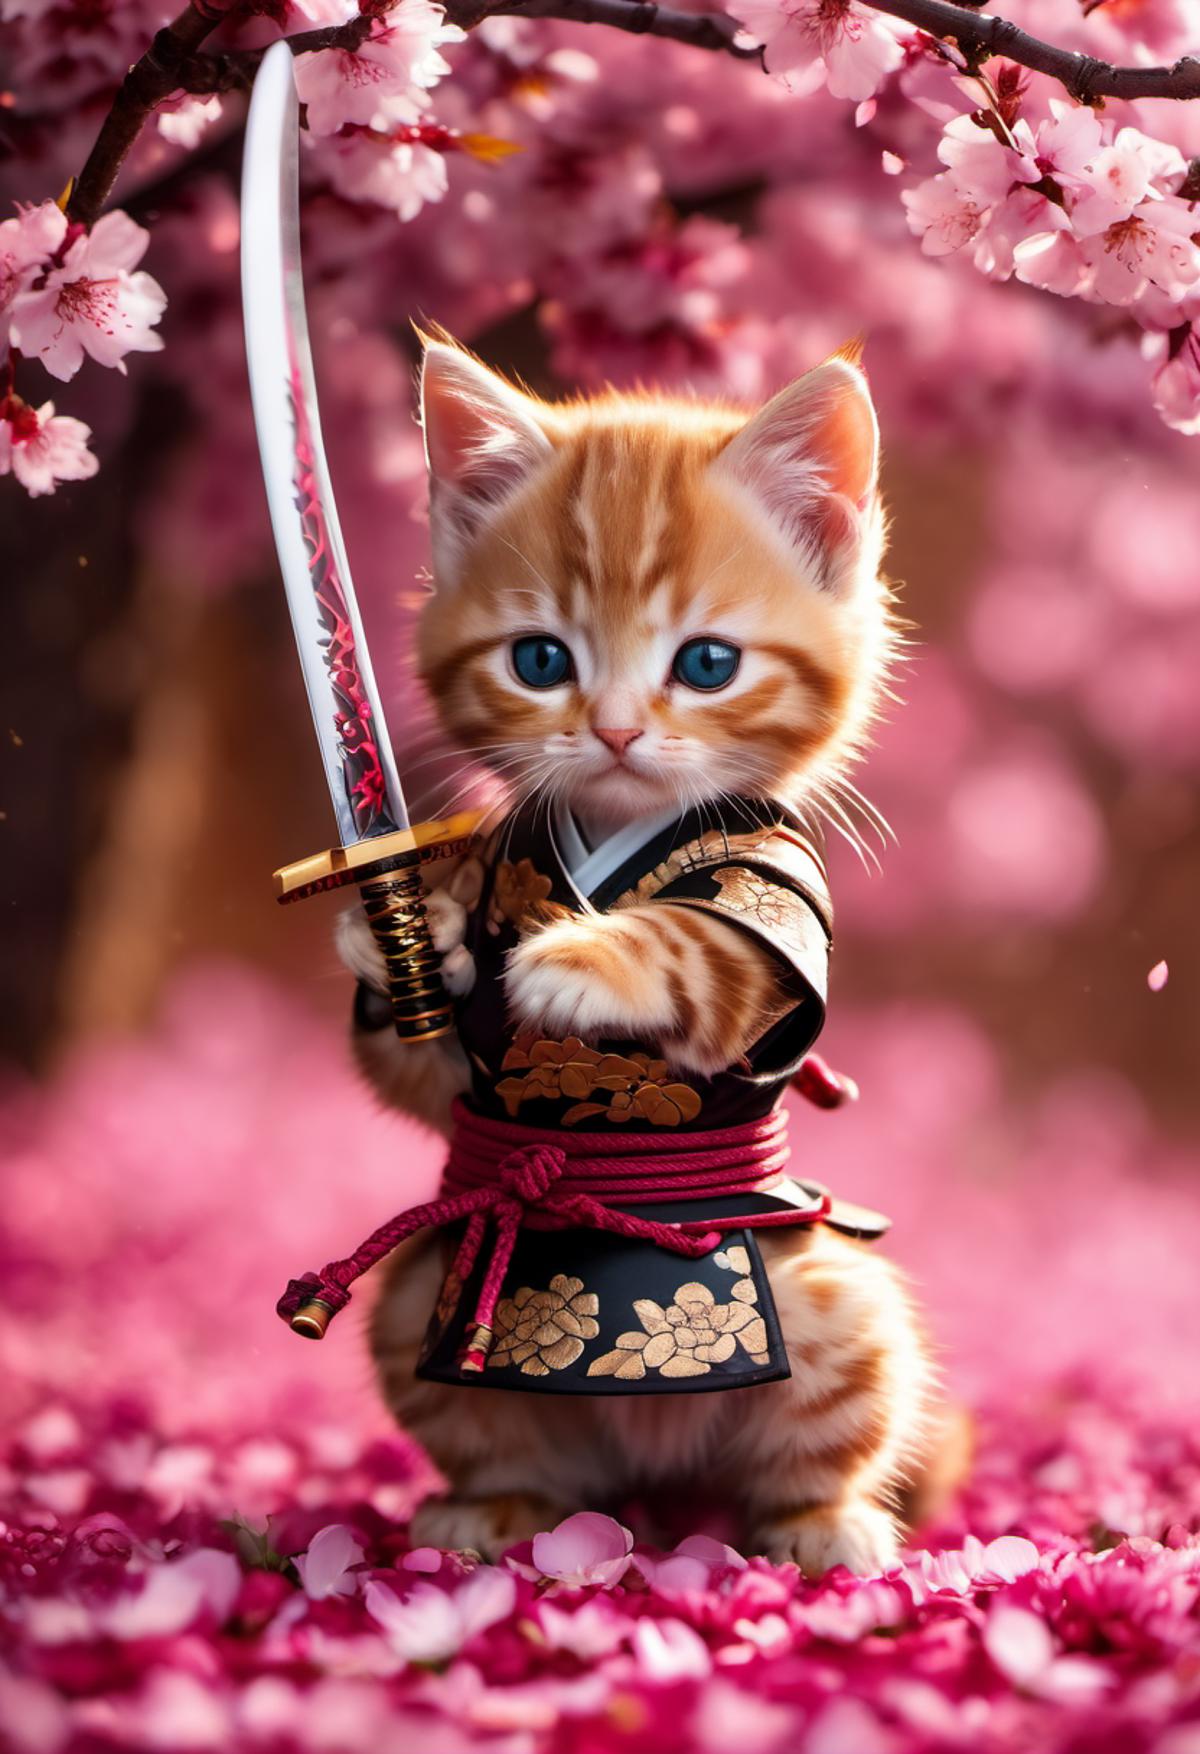 A cute kitten wearing a tiny samurai outfit and holding a sword.